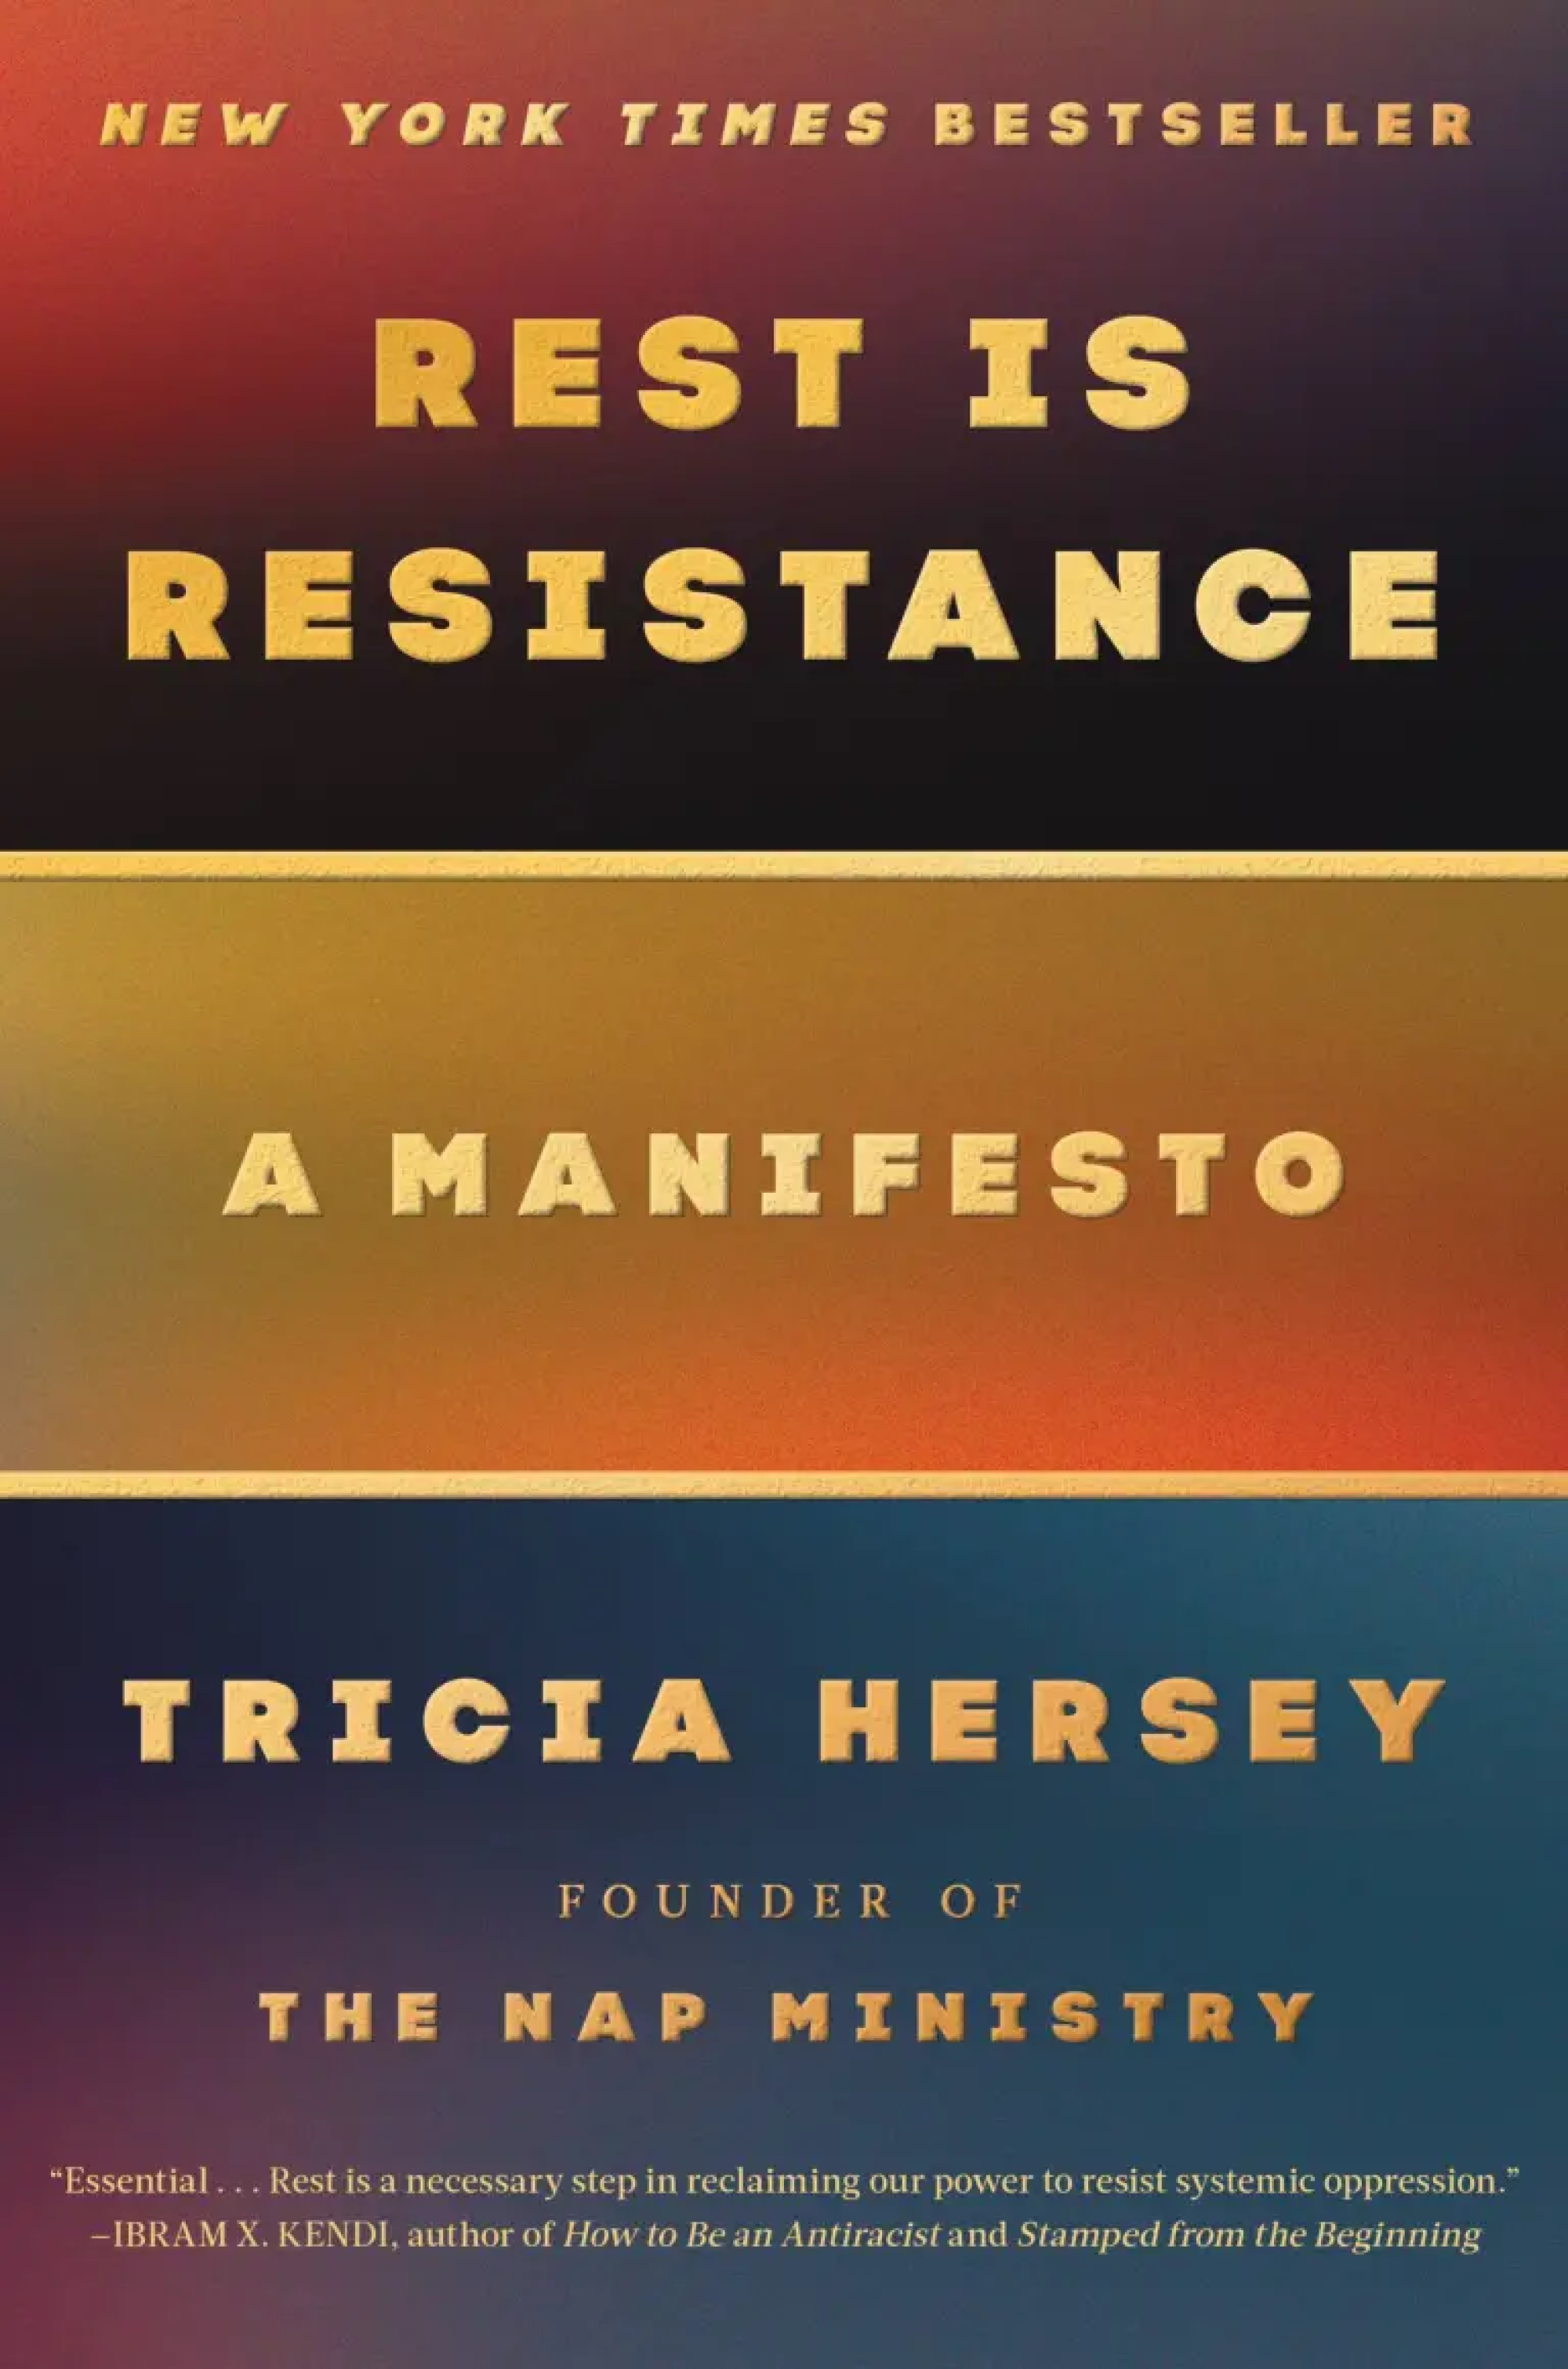 Book cover of “Rest Is Resistance: A Manifesto” by Tricia Hersey